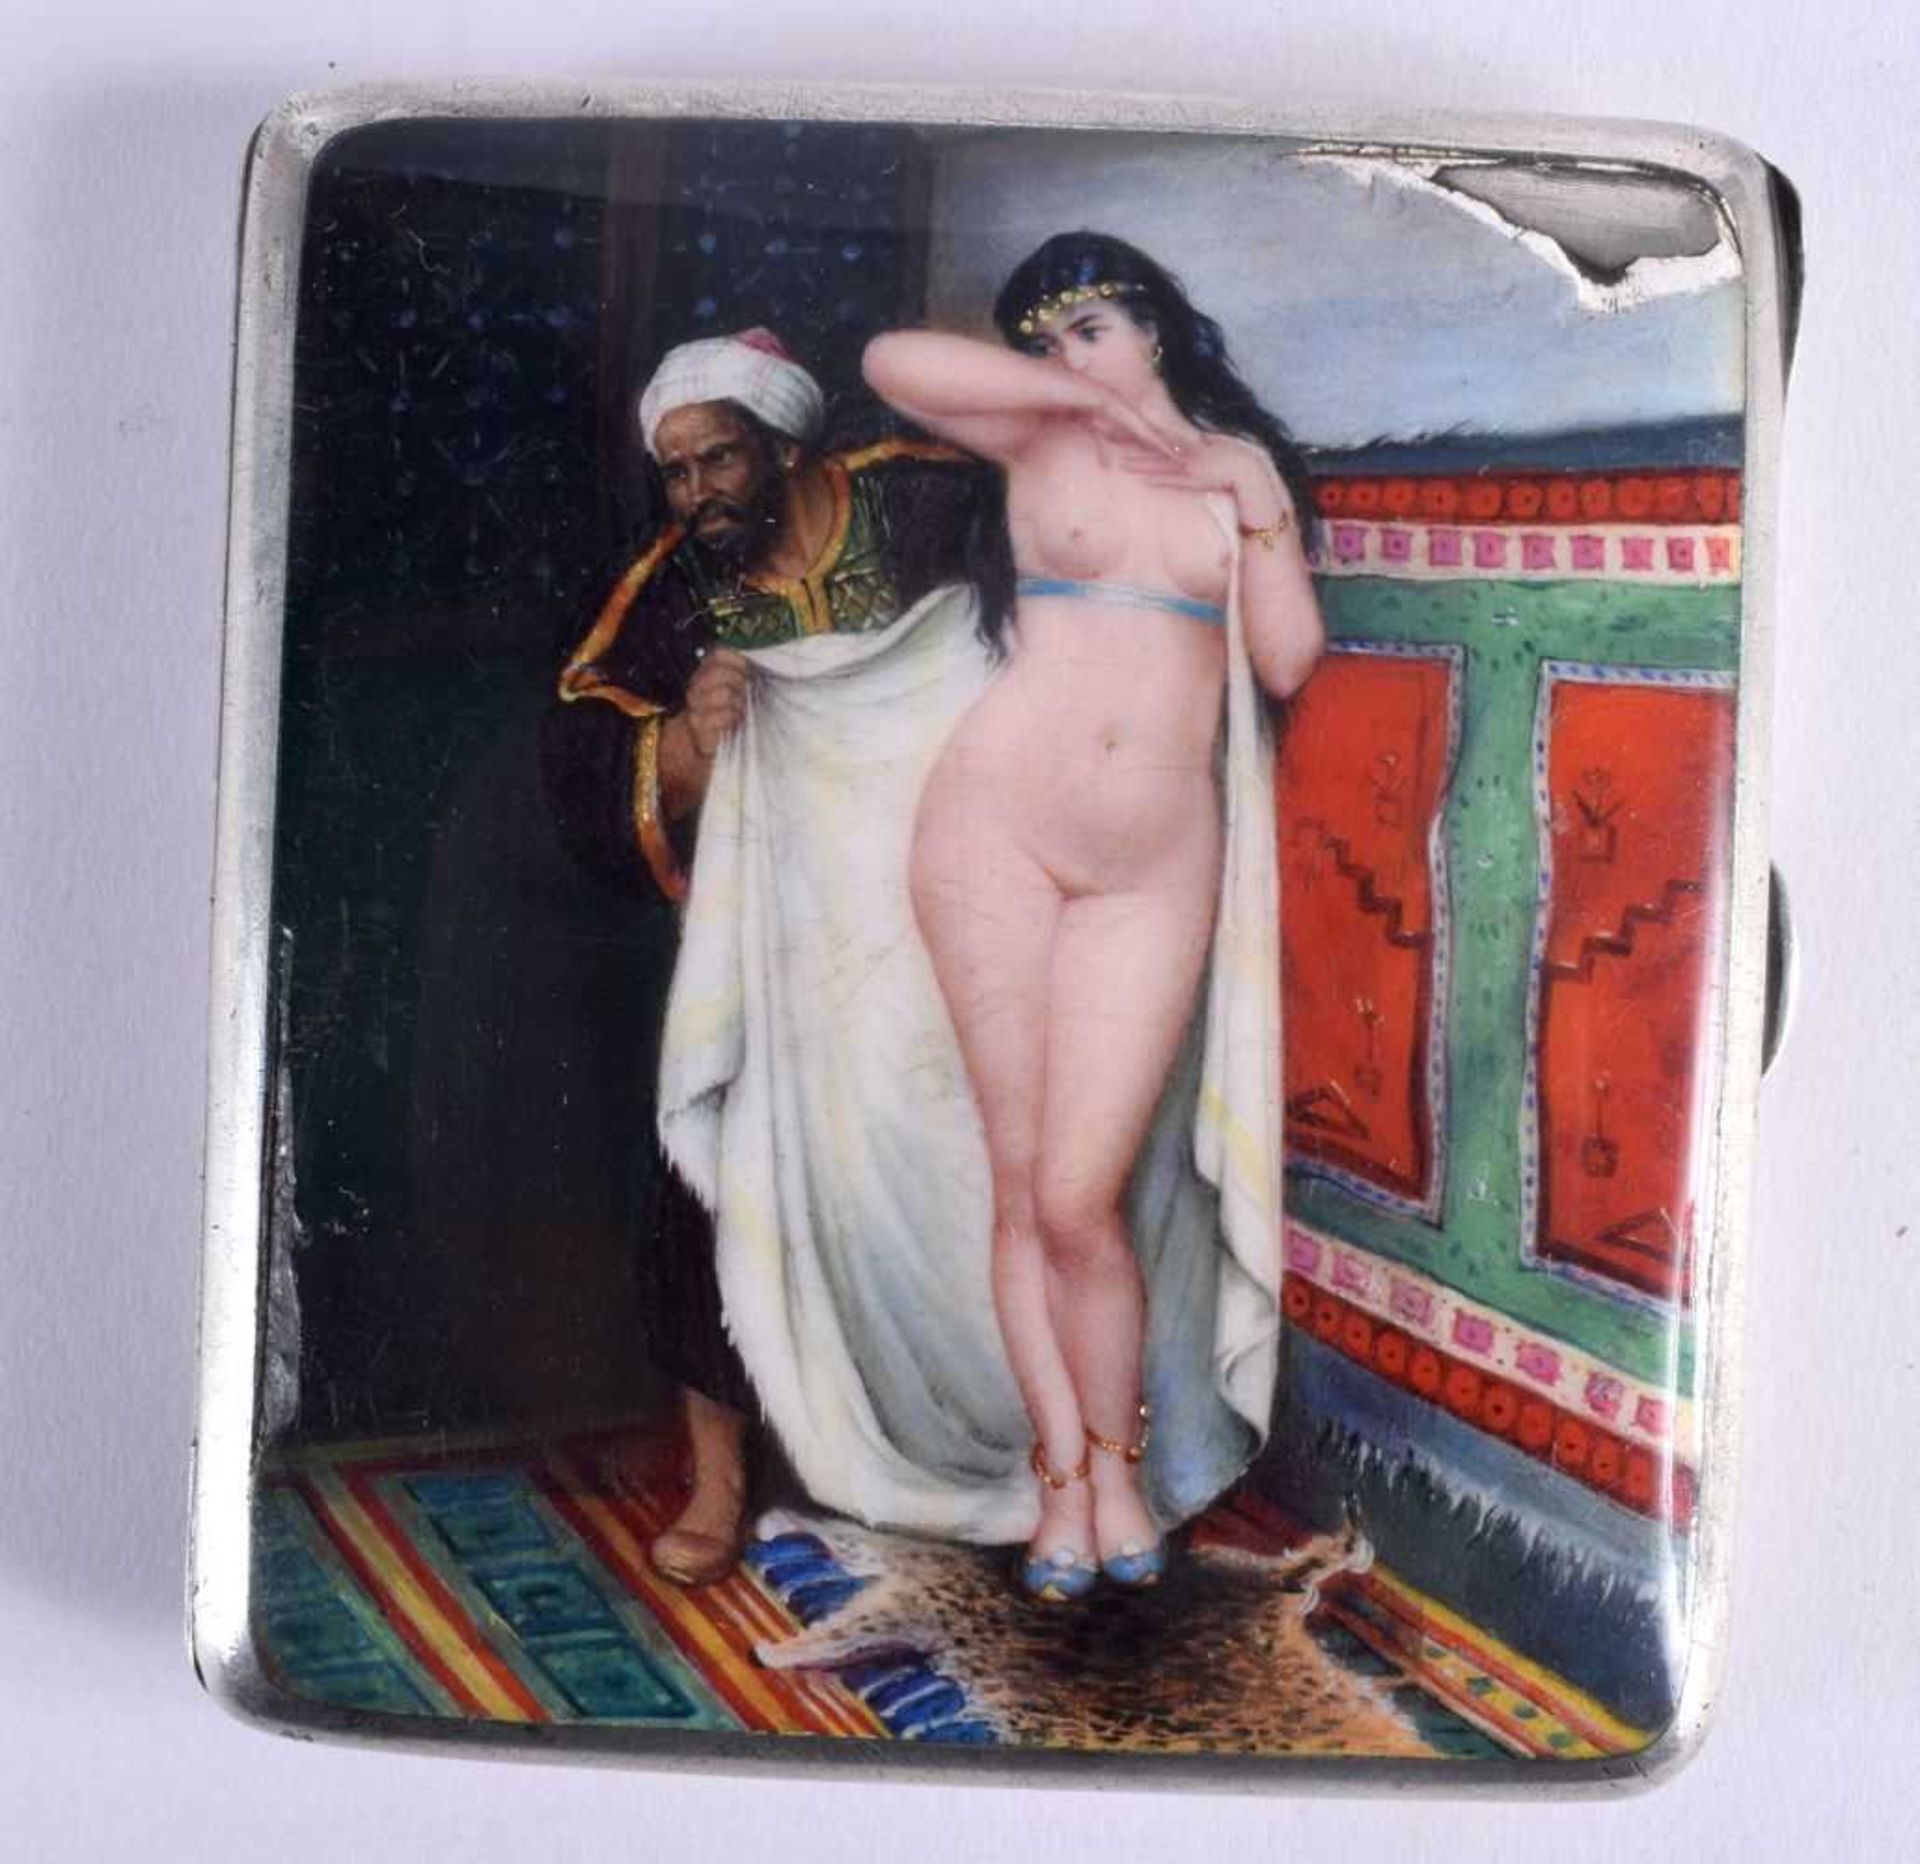 AN ART DECO SILVER AND ENAMEL CIGARETTE CASE painted with a Middle Eastern male revealing a nude